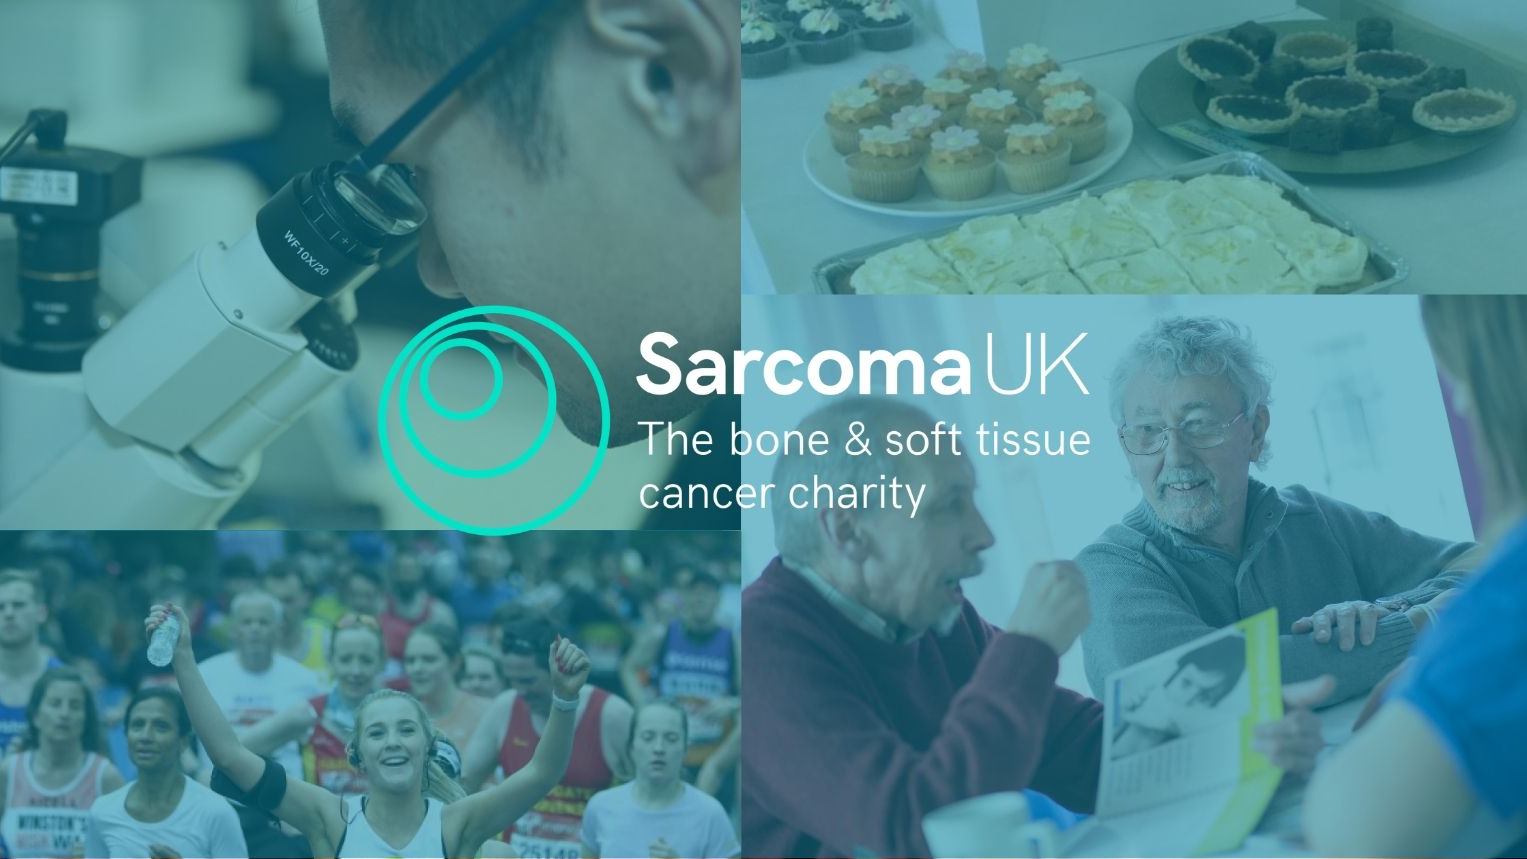 Harry Hickey is fundraising for Sarcoma UK